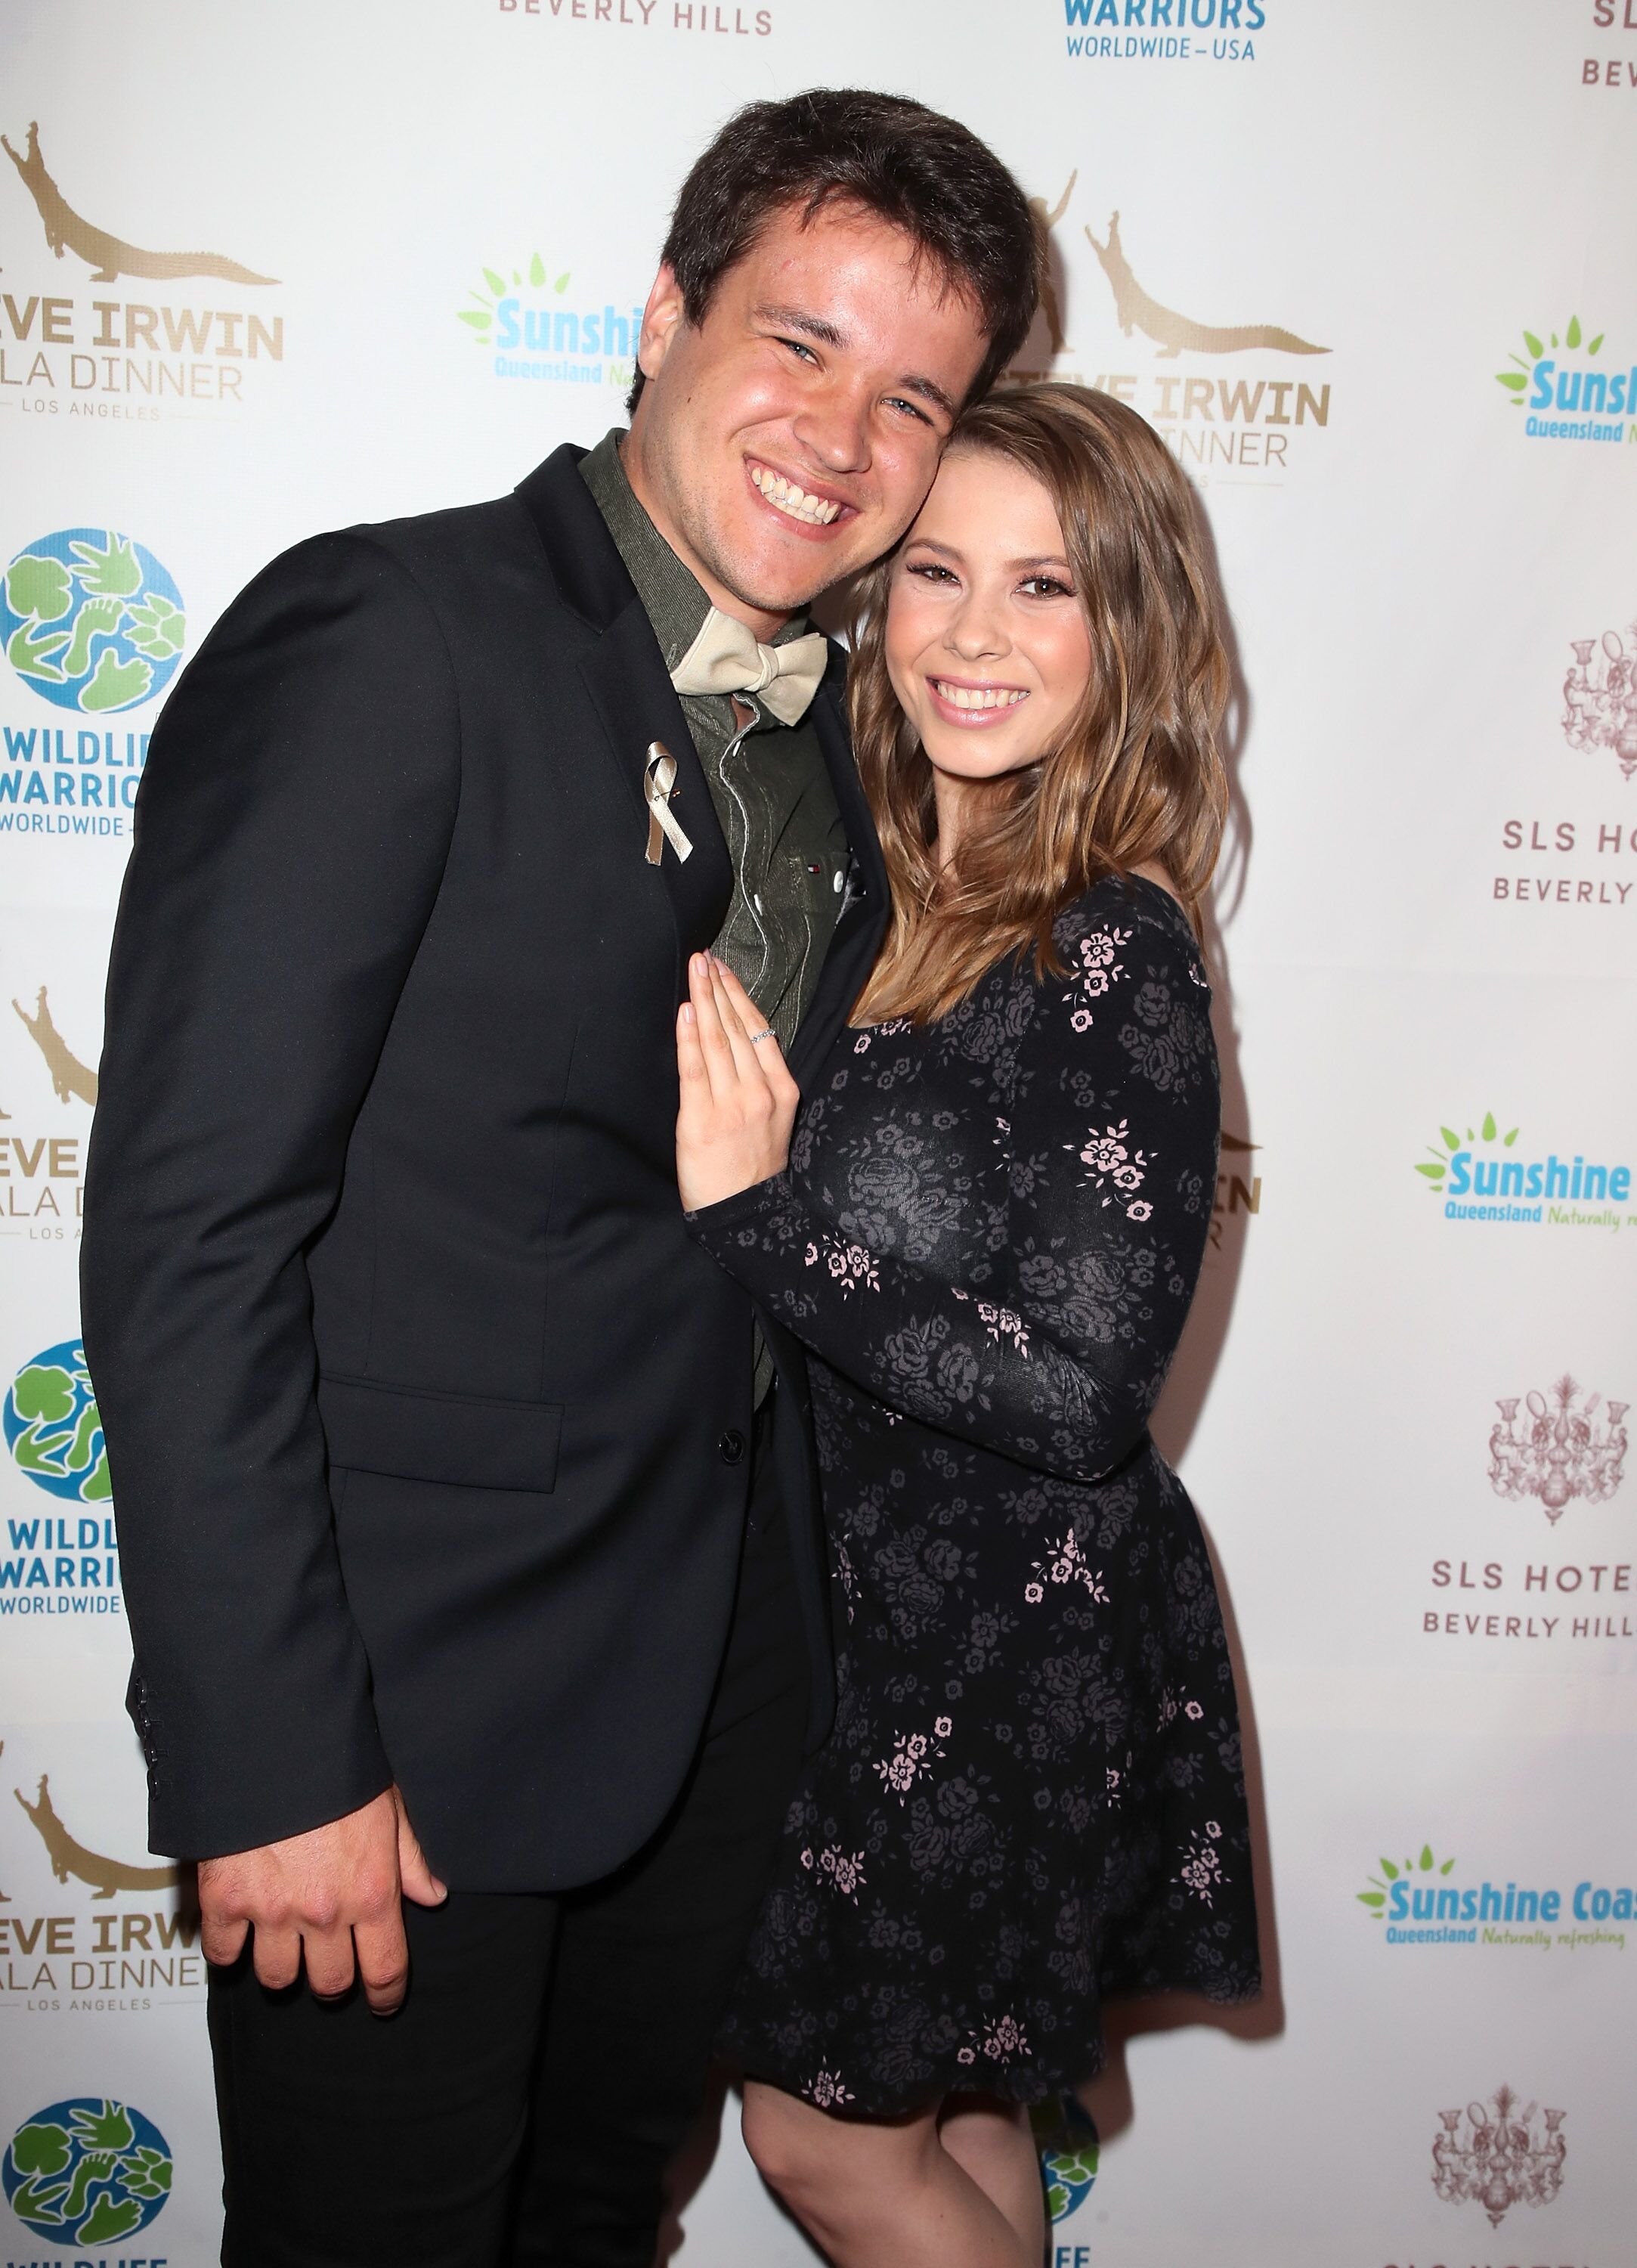 Chandler Powell and Bindi Irwin at the Steve Irwin Gala Dinner in 2018, in Beverly Hills | Source: Getty Images